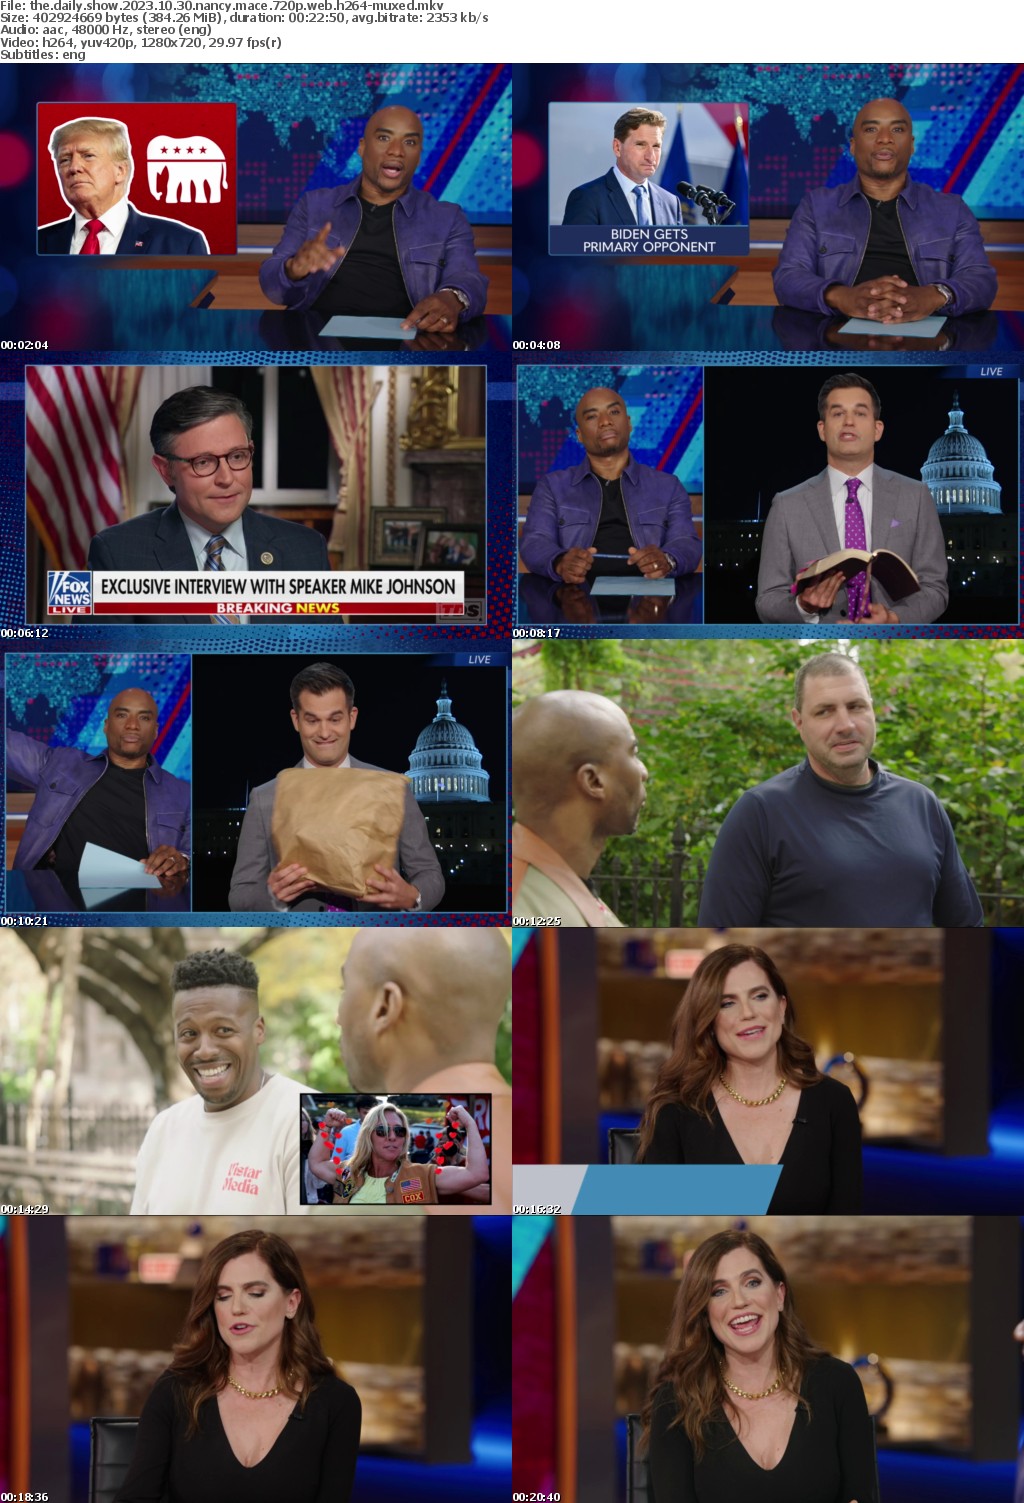 The Daily Show 2023 10 30 Nancy Mace 720p WEB H264-MUXED